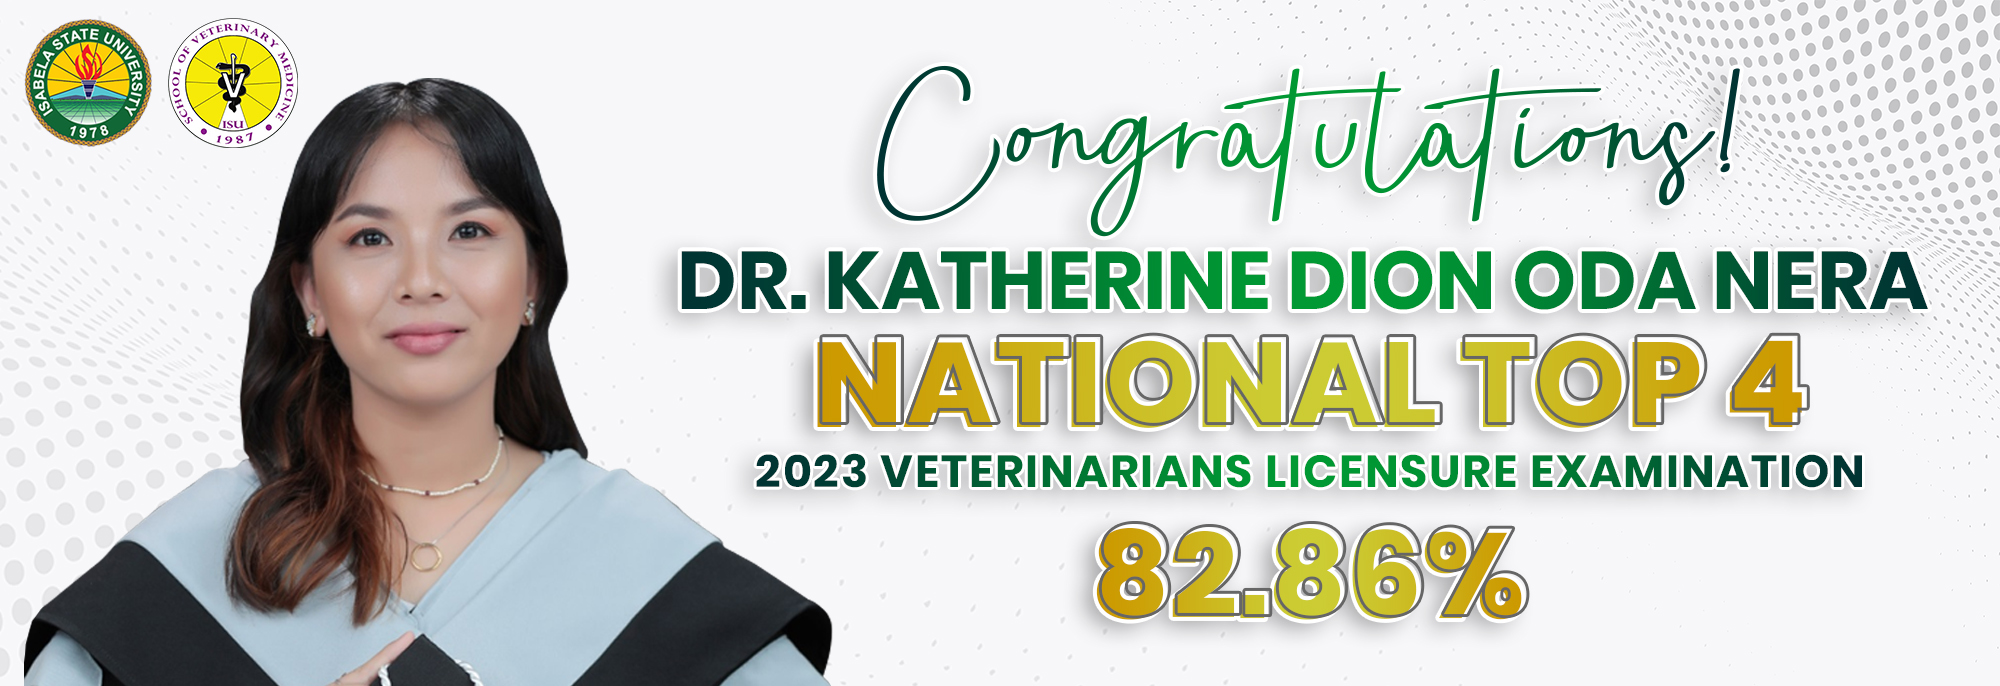 DR. KATHERINE DION ODA NERA of Isabela State University – Echague Campus landed as NATIONAL TOP 4 in the October 2023 Veterinarians Licensure Examination!